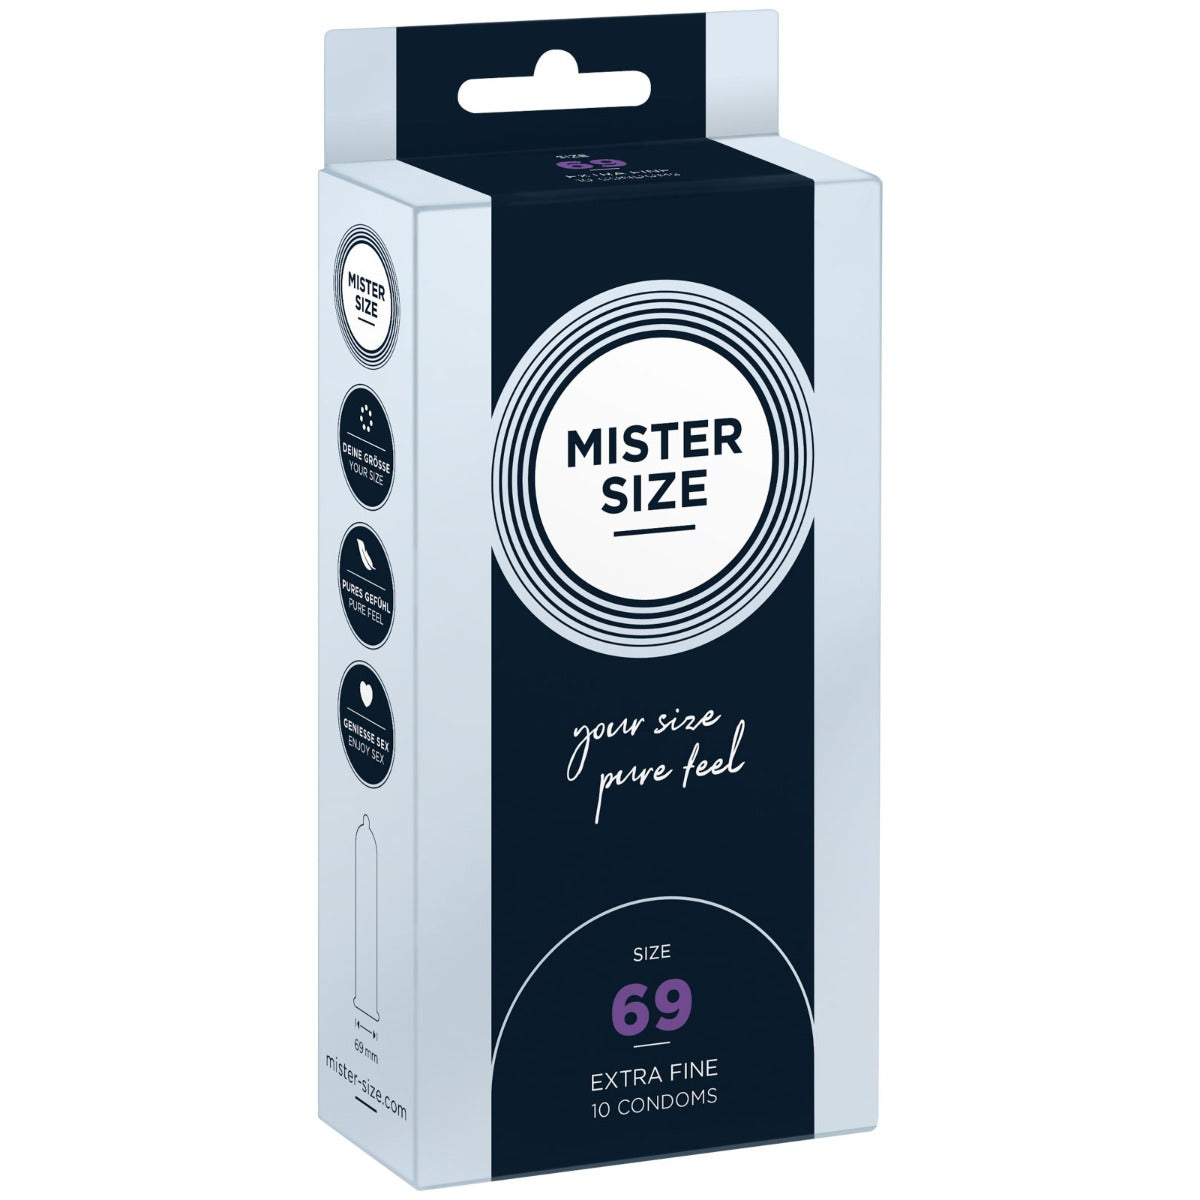 Condoms MISTER SIZE - pure feel Condoms - Size 69 mm (10 pack)   